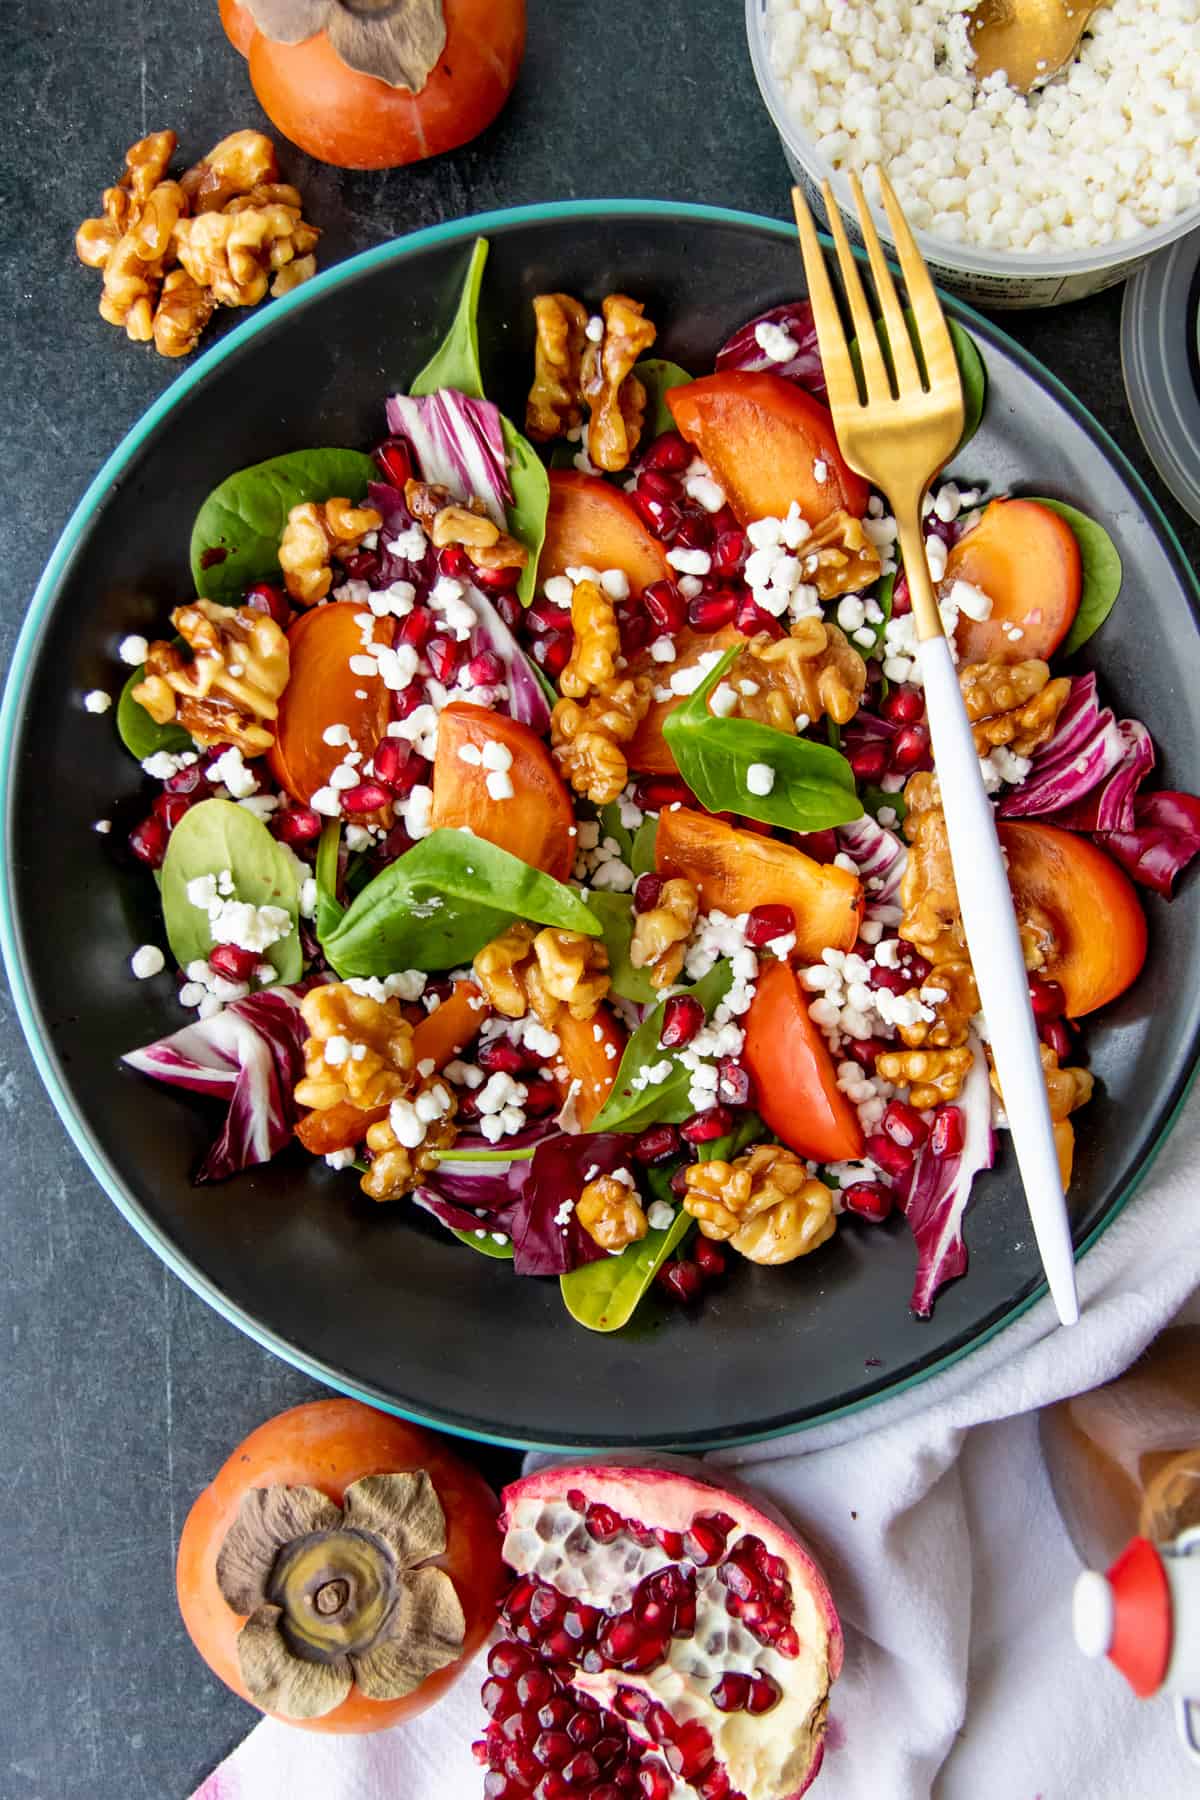 A fork rests on a dark bowl, filled with pomegranate and persimmon salad.